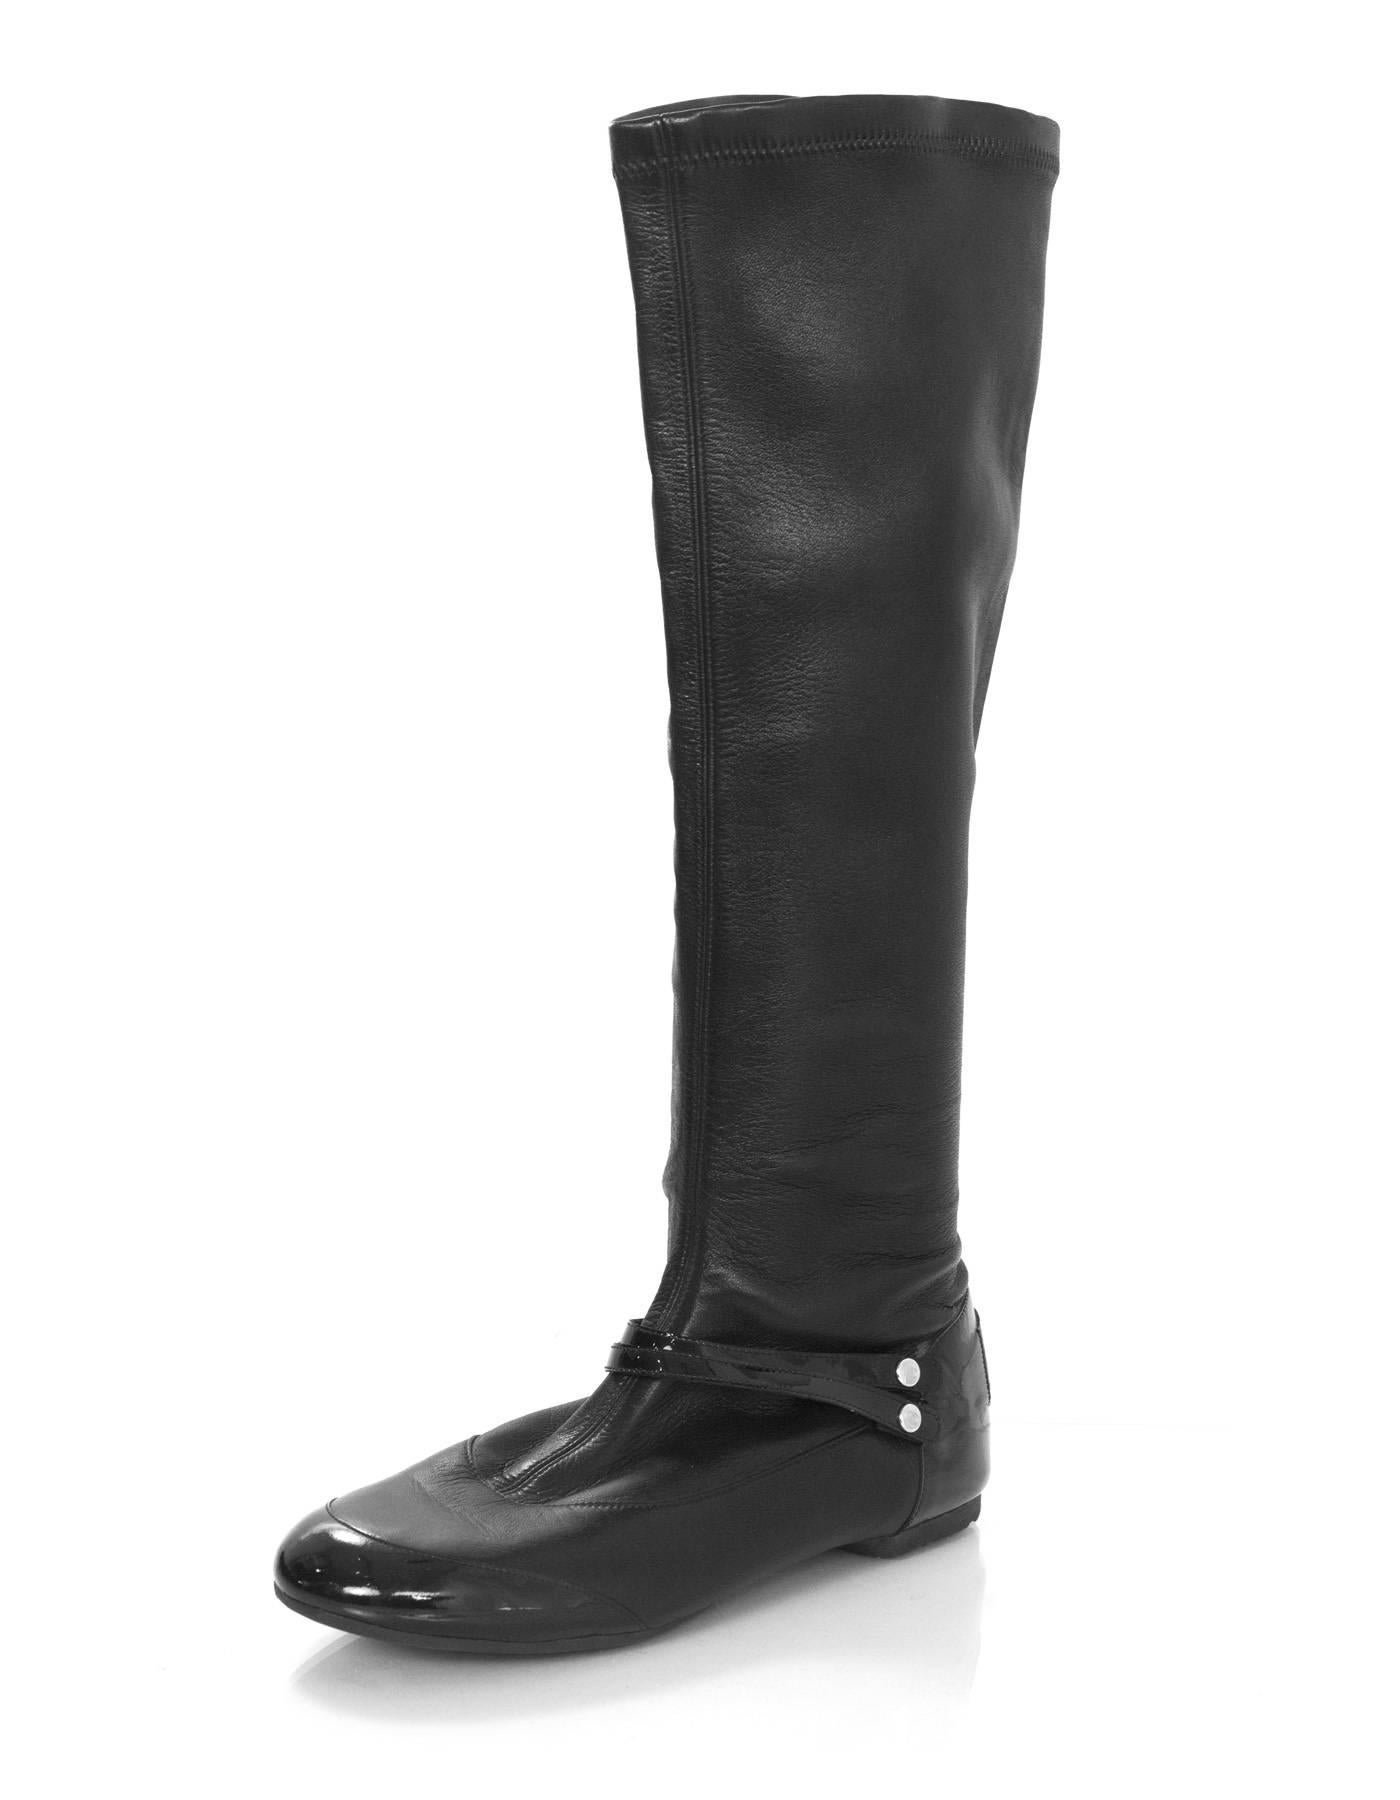 Chanel Black Leather Boots Sz 36
Features patent leather heels, toes, and straps across ankle

Made In: Italy
Color: Black
Materials: Leather, patent leather
Closure/Opening: Pull on
Sole Stamp: Made in Italy 36
Overall Condition: Excellent